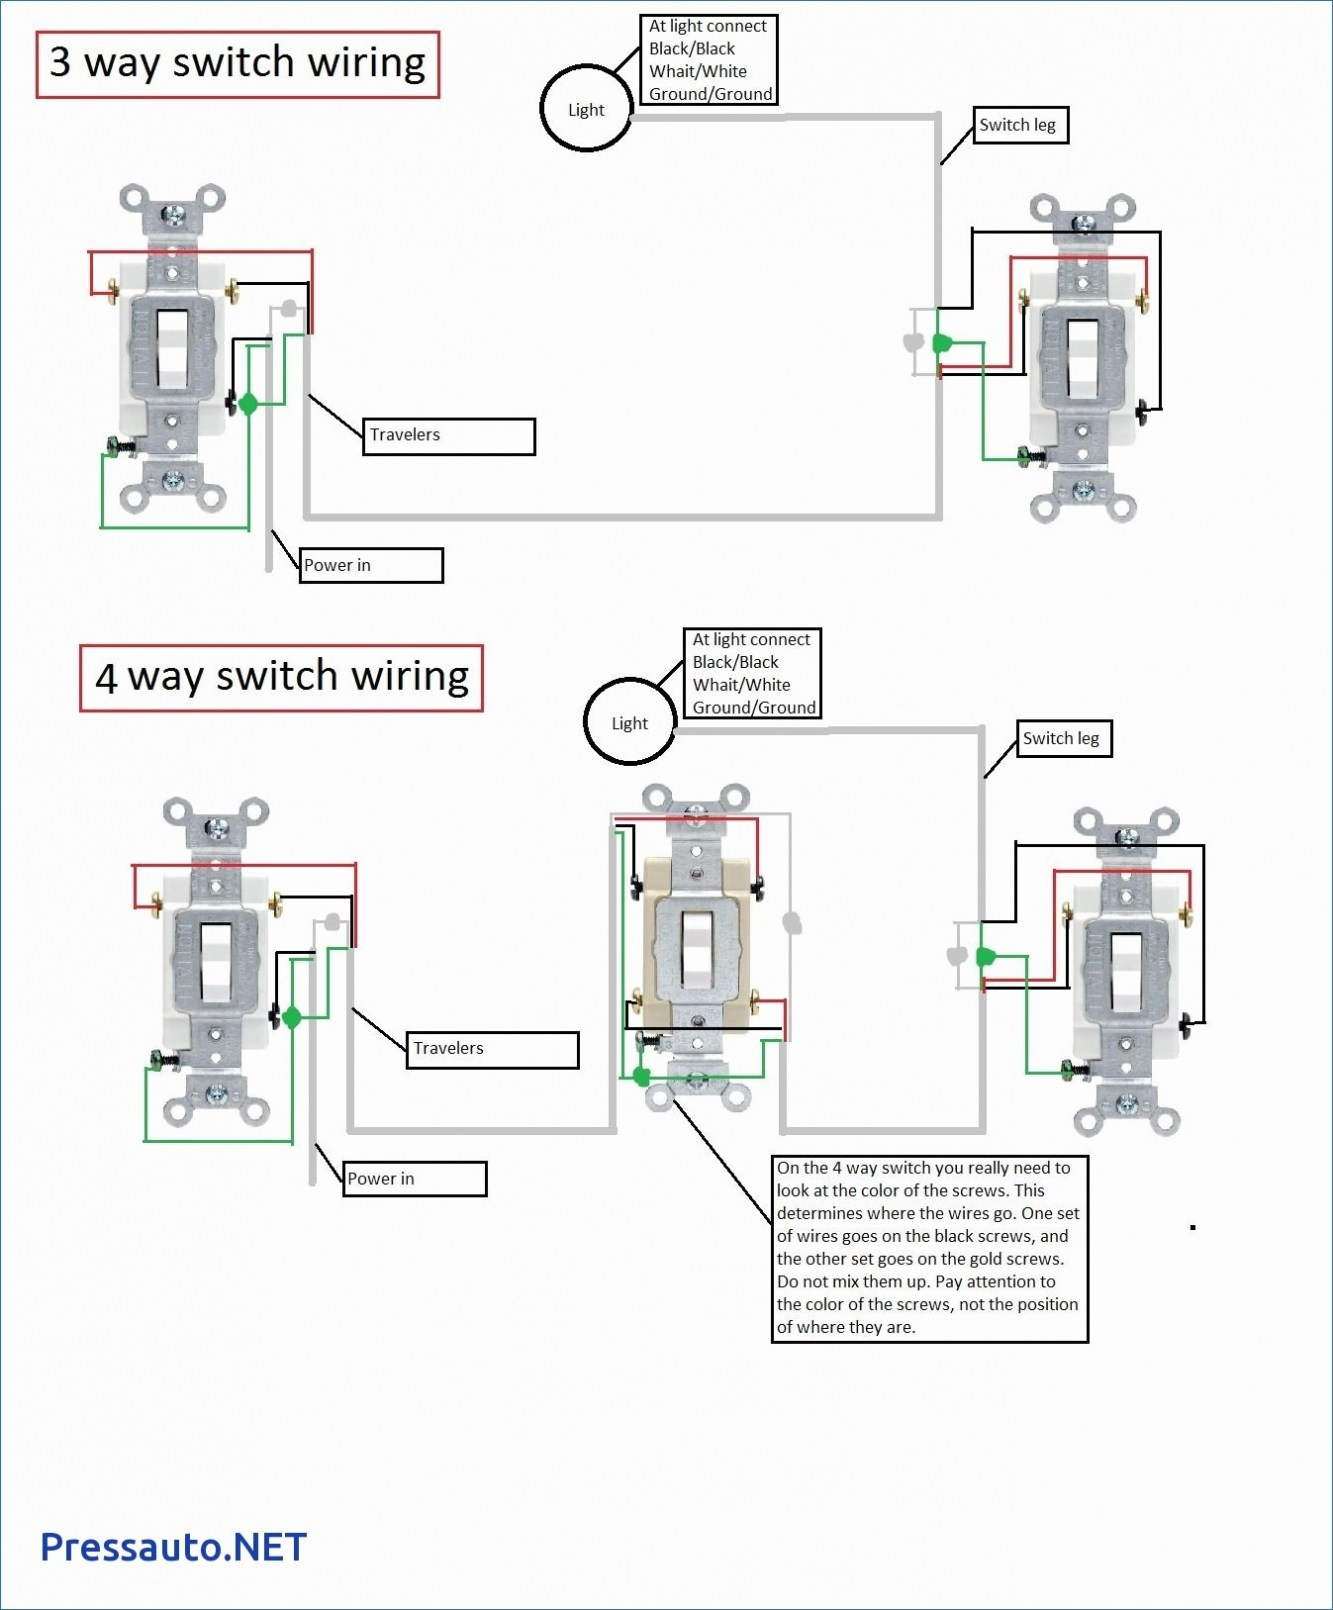 5 Way Switch Wiring Diagram Residential | Manual E-Books - Leviton 4 Way Switch Wiring Diagram